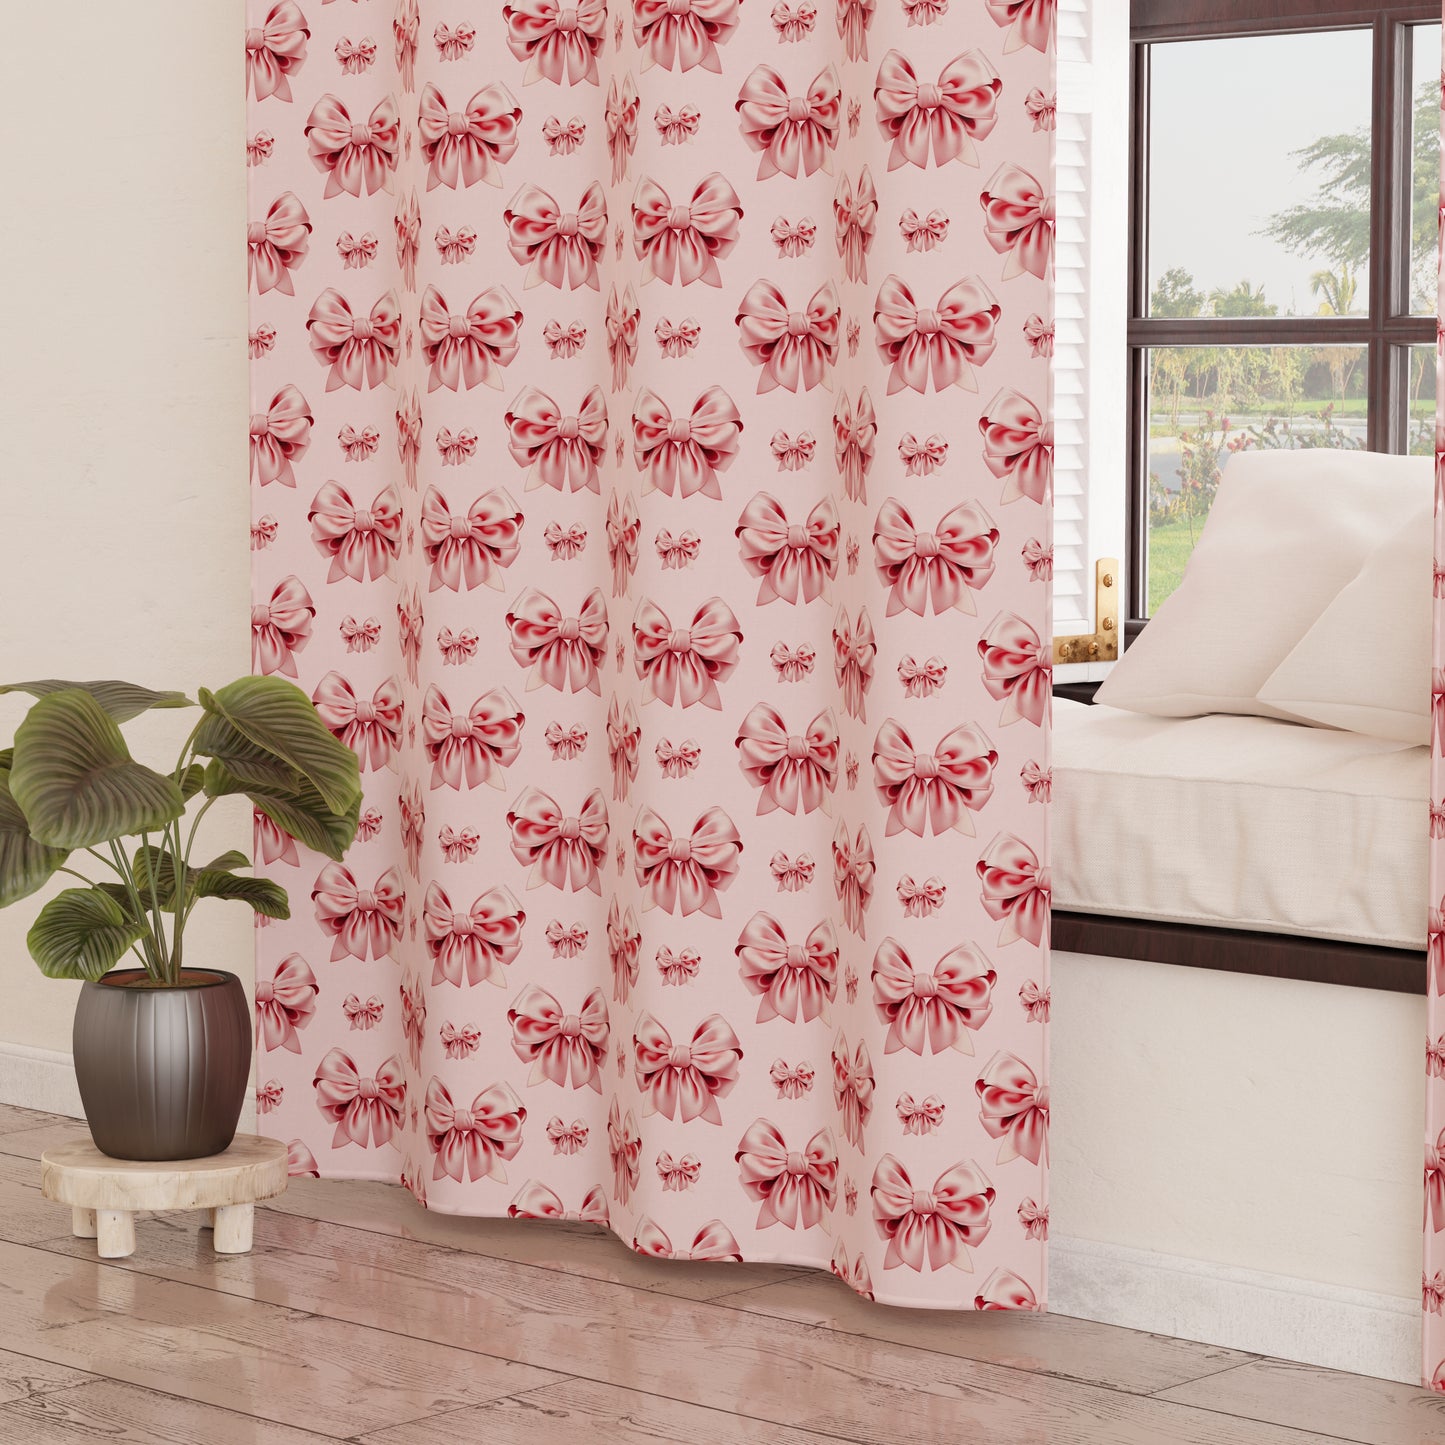 Indoor Furnishing Curtain Panels with Pink Bow Rings